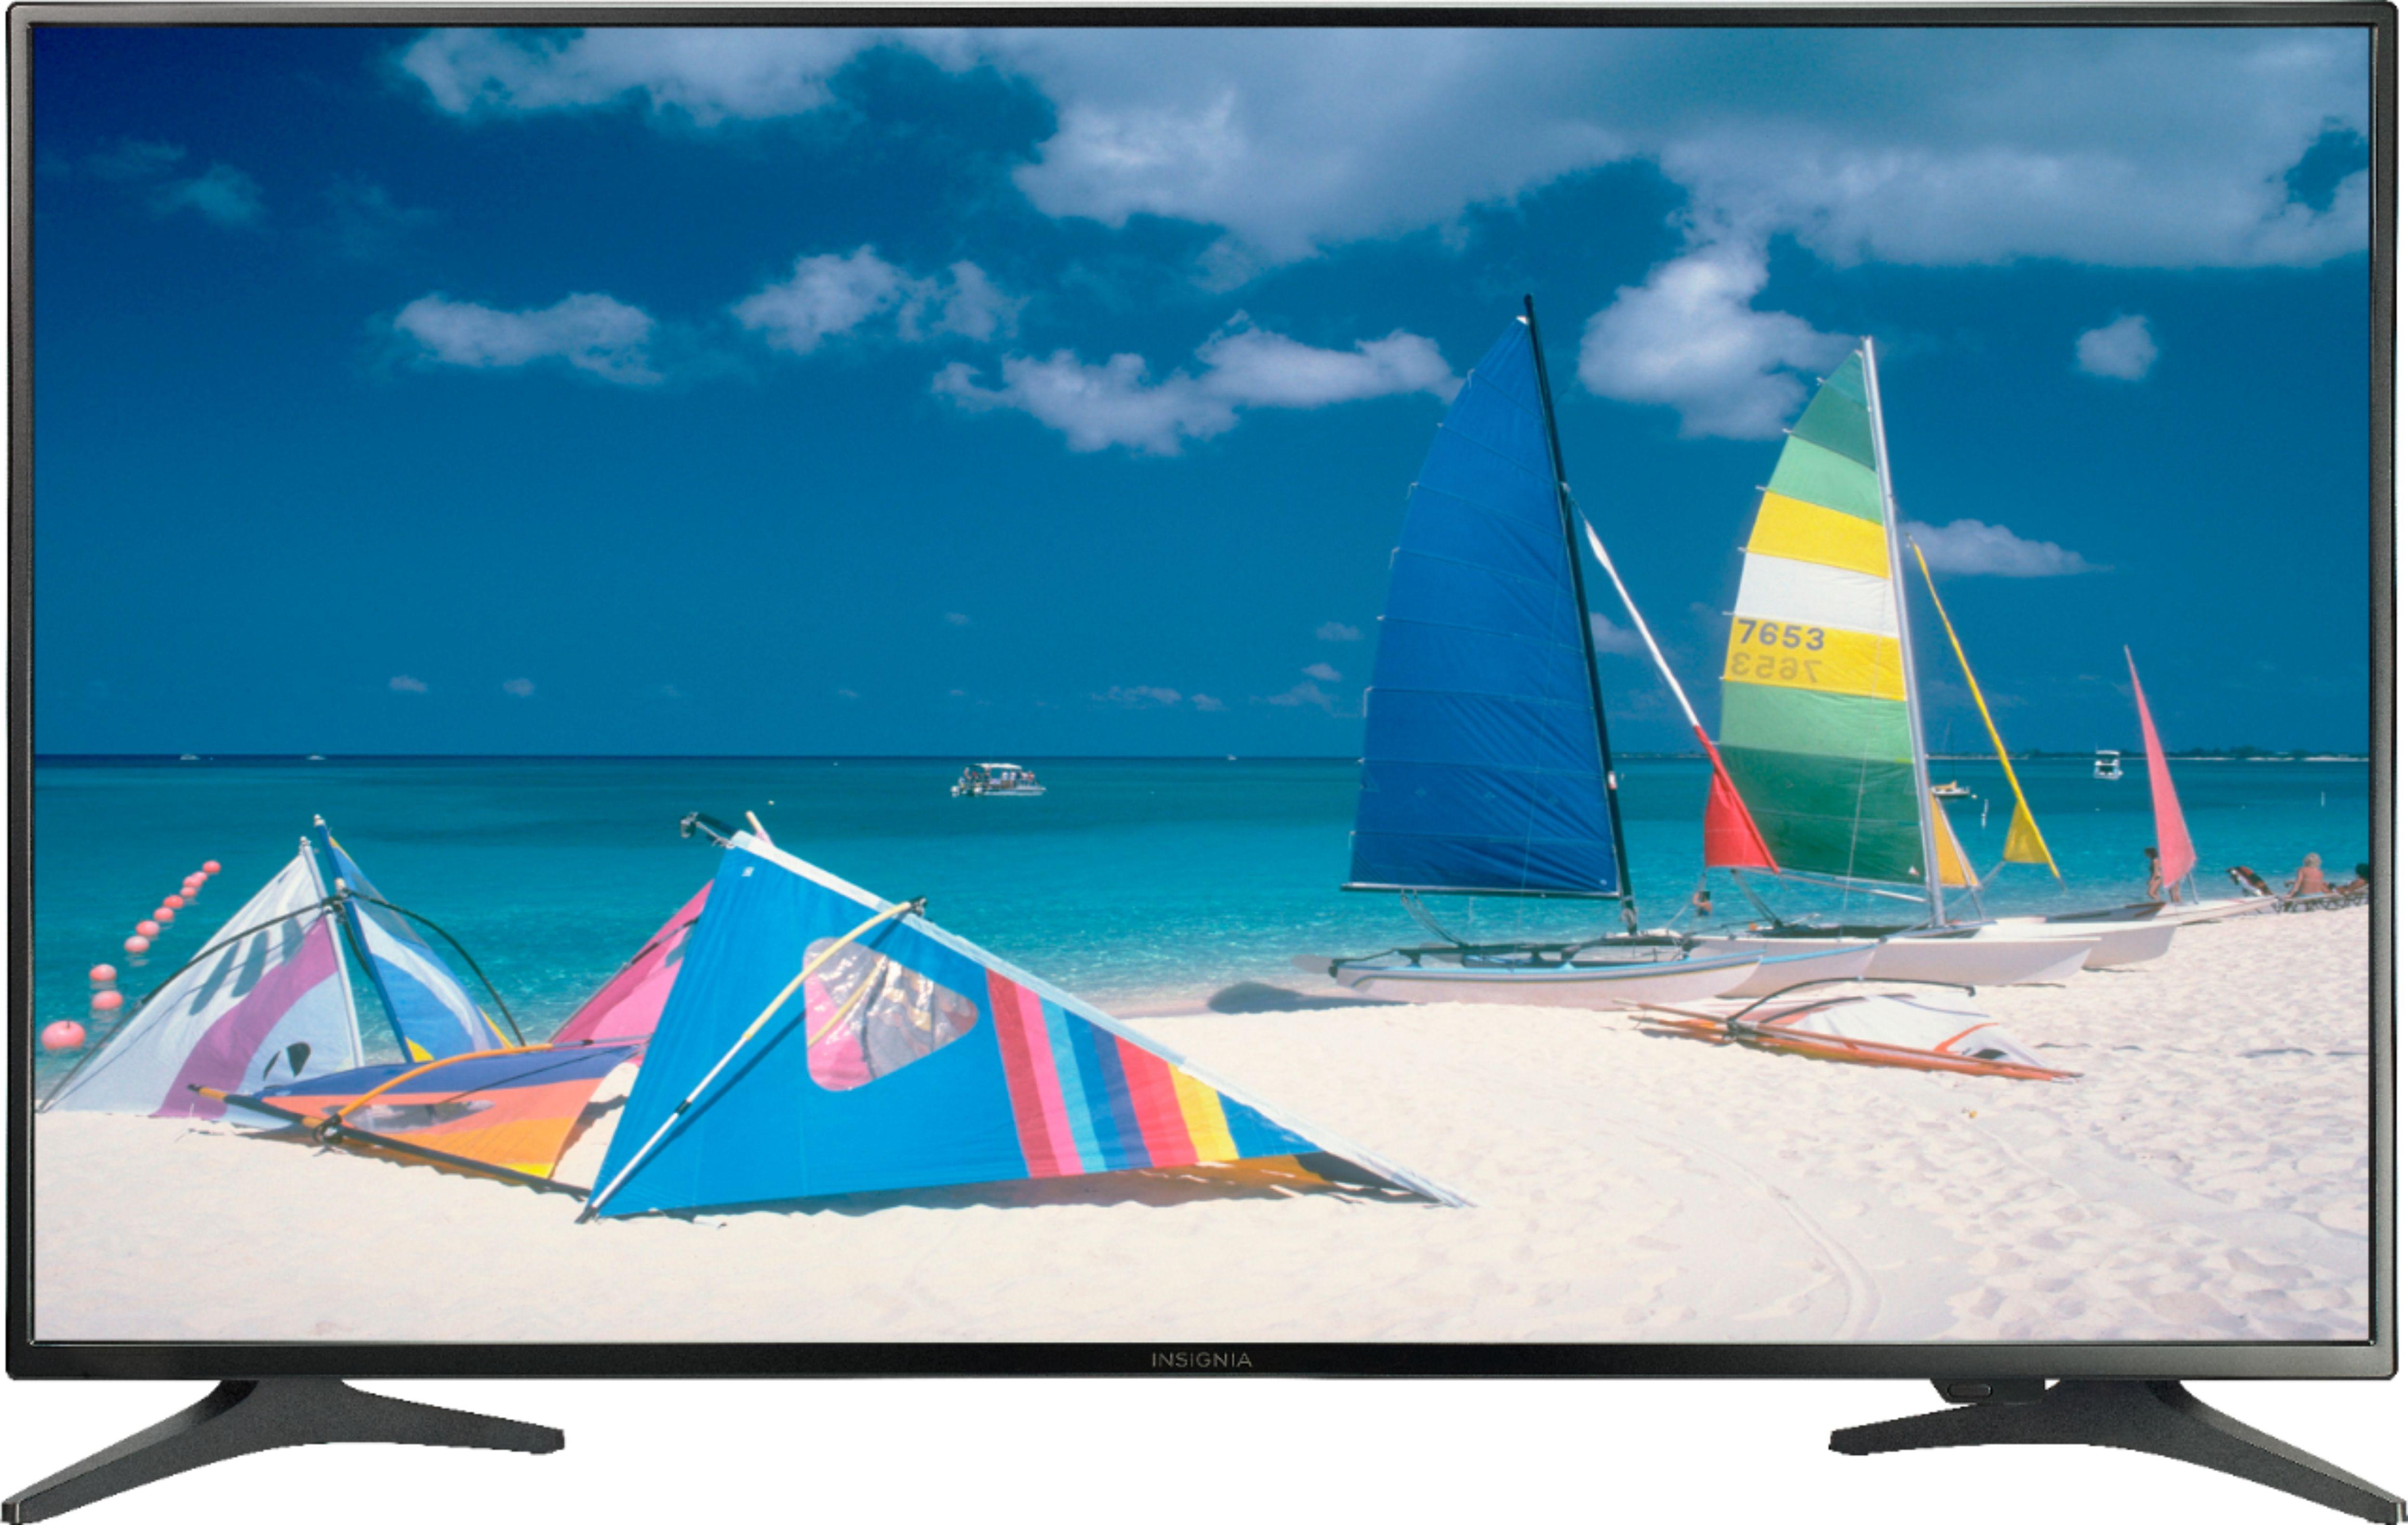 43 Insignia Class 1080p LED HDTV for $119.99 Shipped